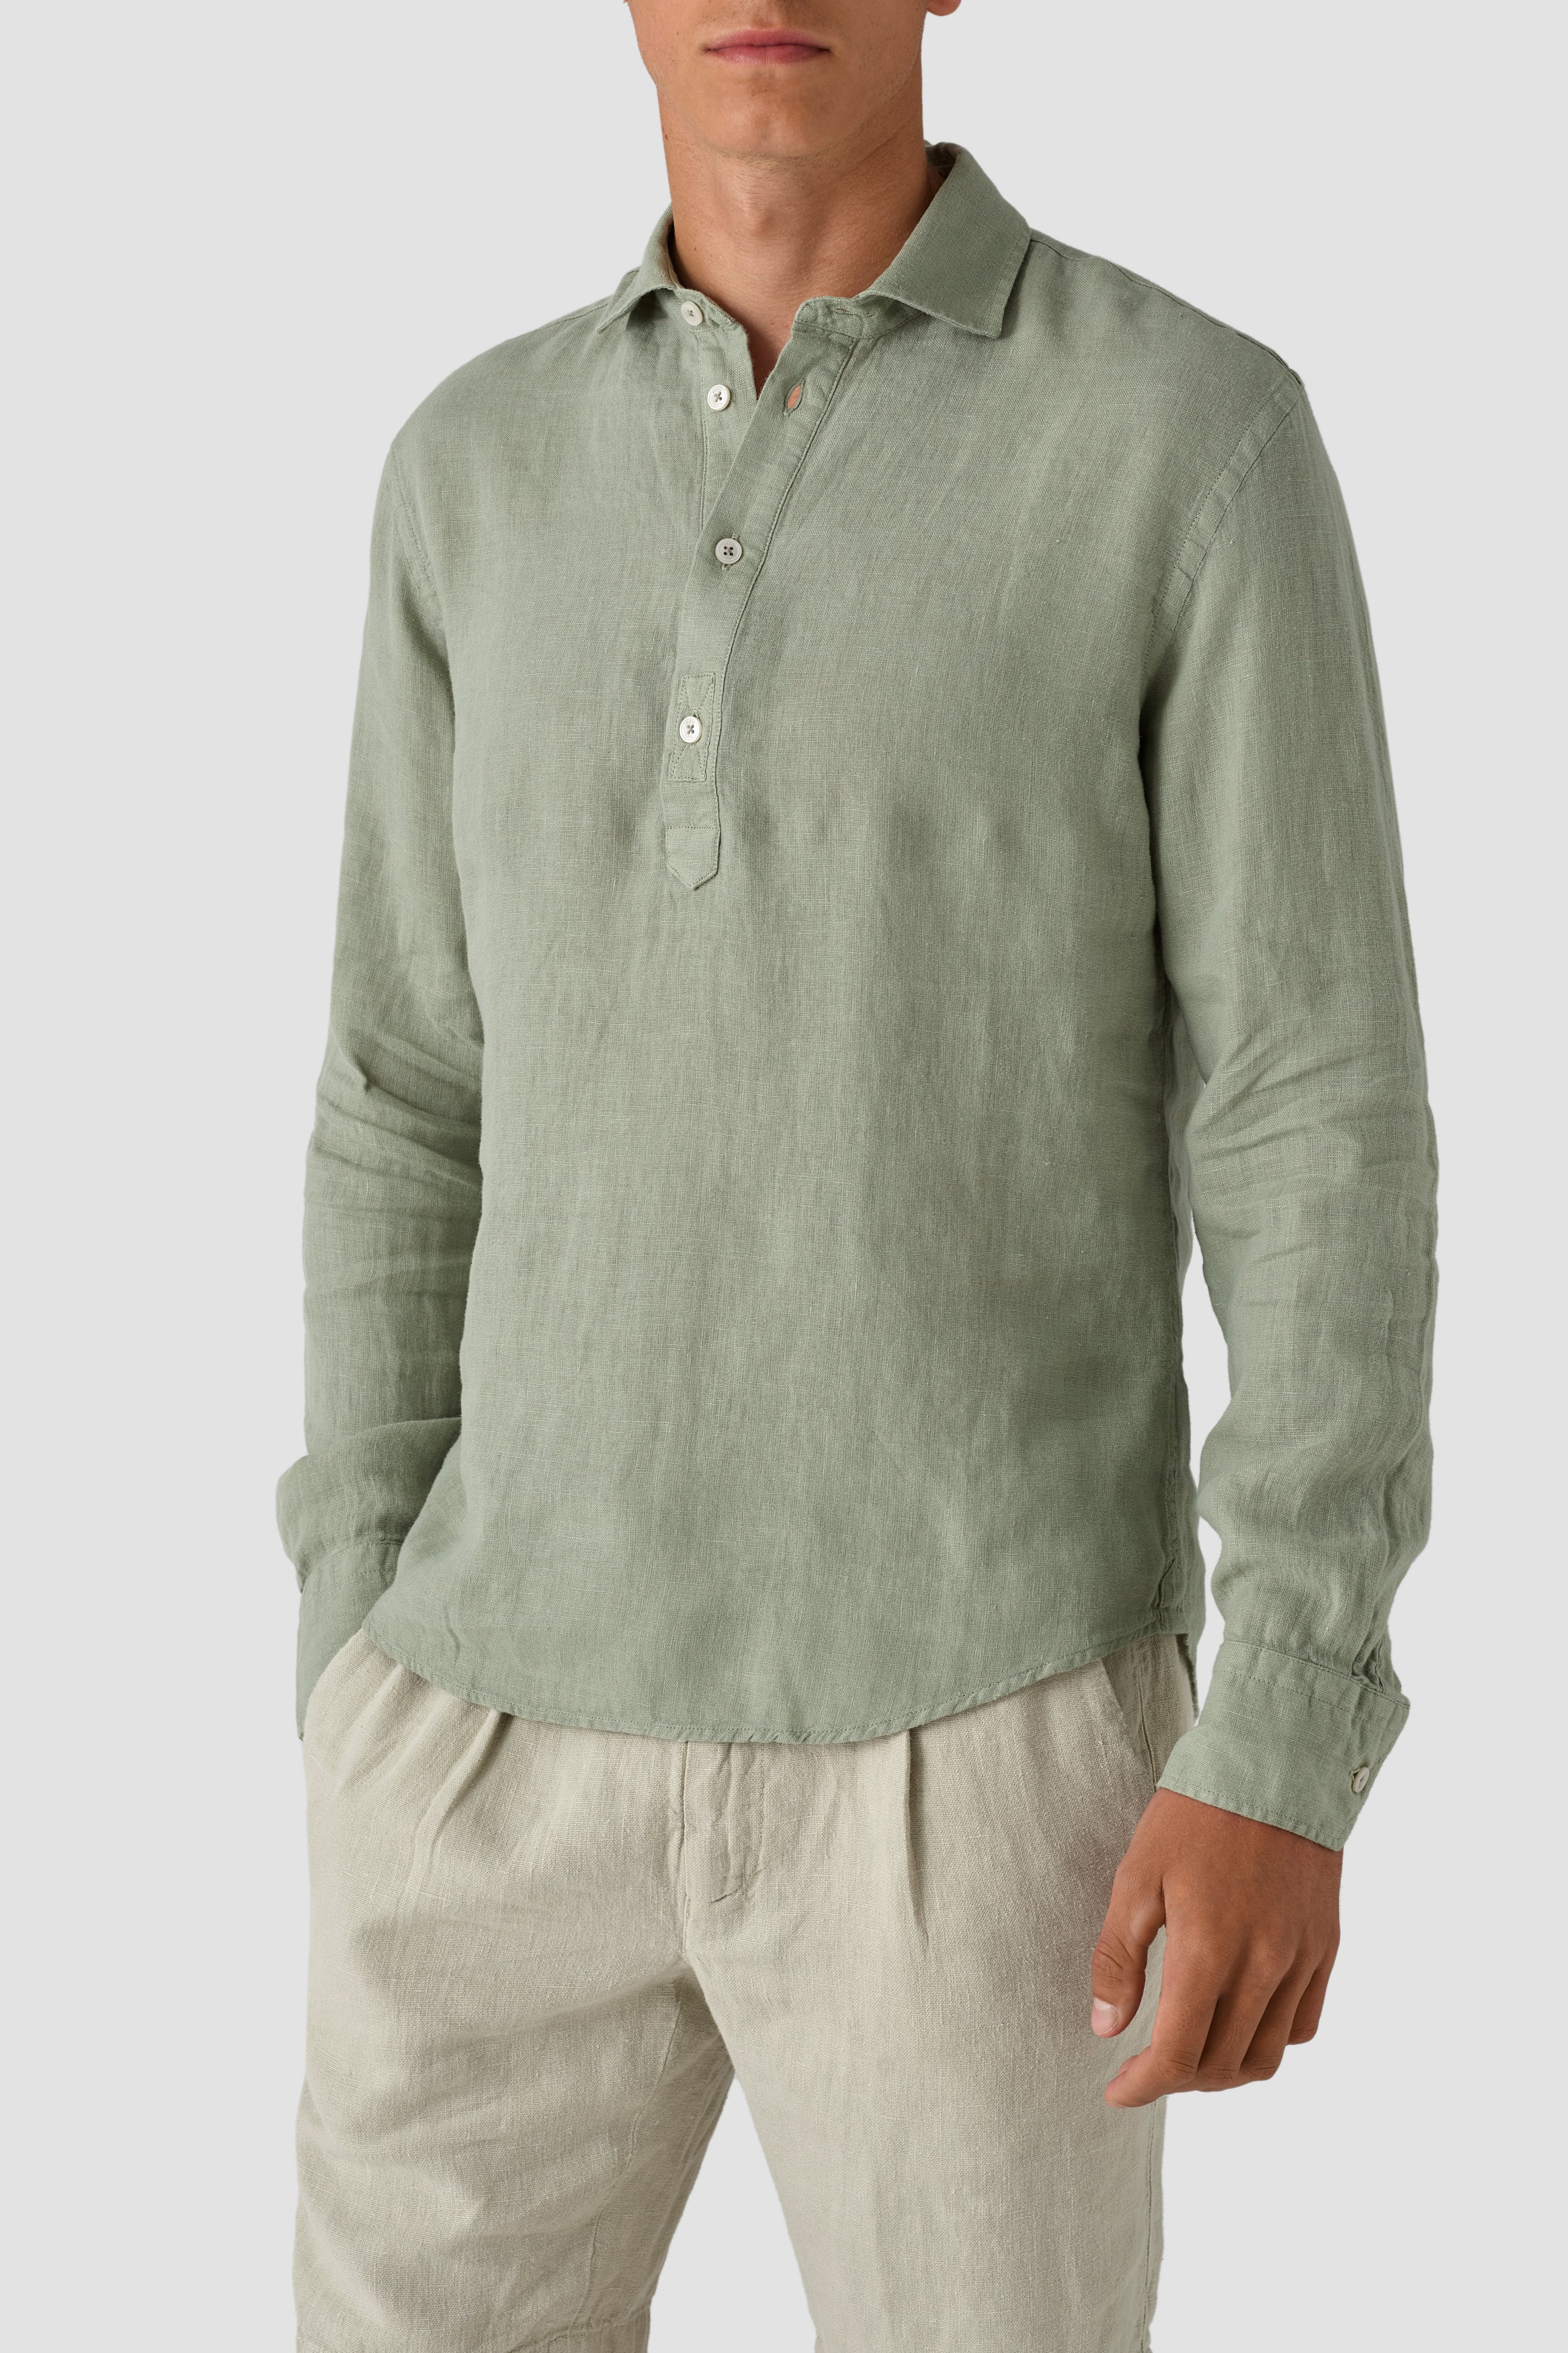 Mr Polo LSleeve Seagrass